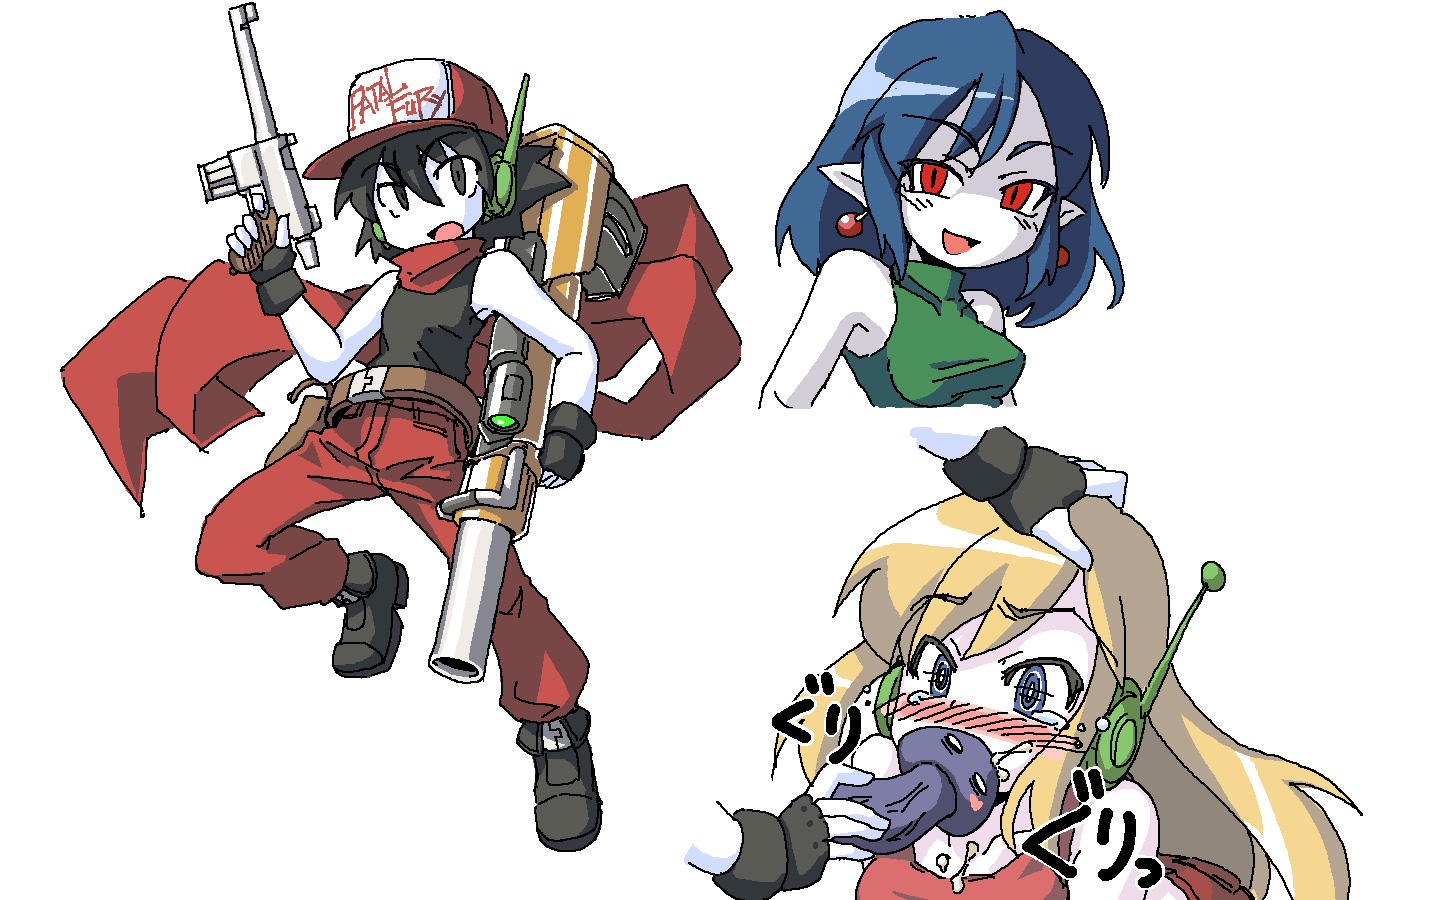 Free Download Cave Story Wallpaper 1440x900 1610 [1440x900] For Your Desktop Mobile And Tablet